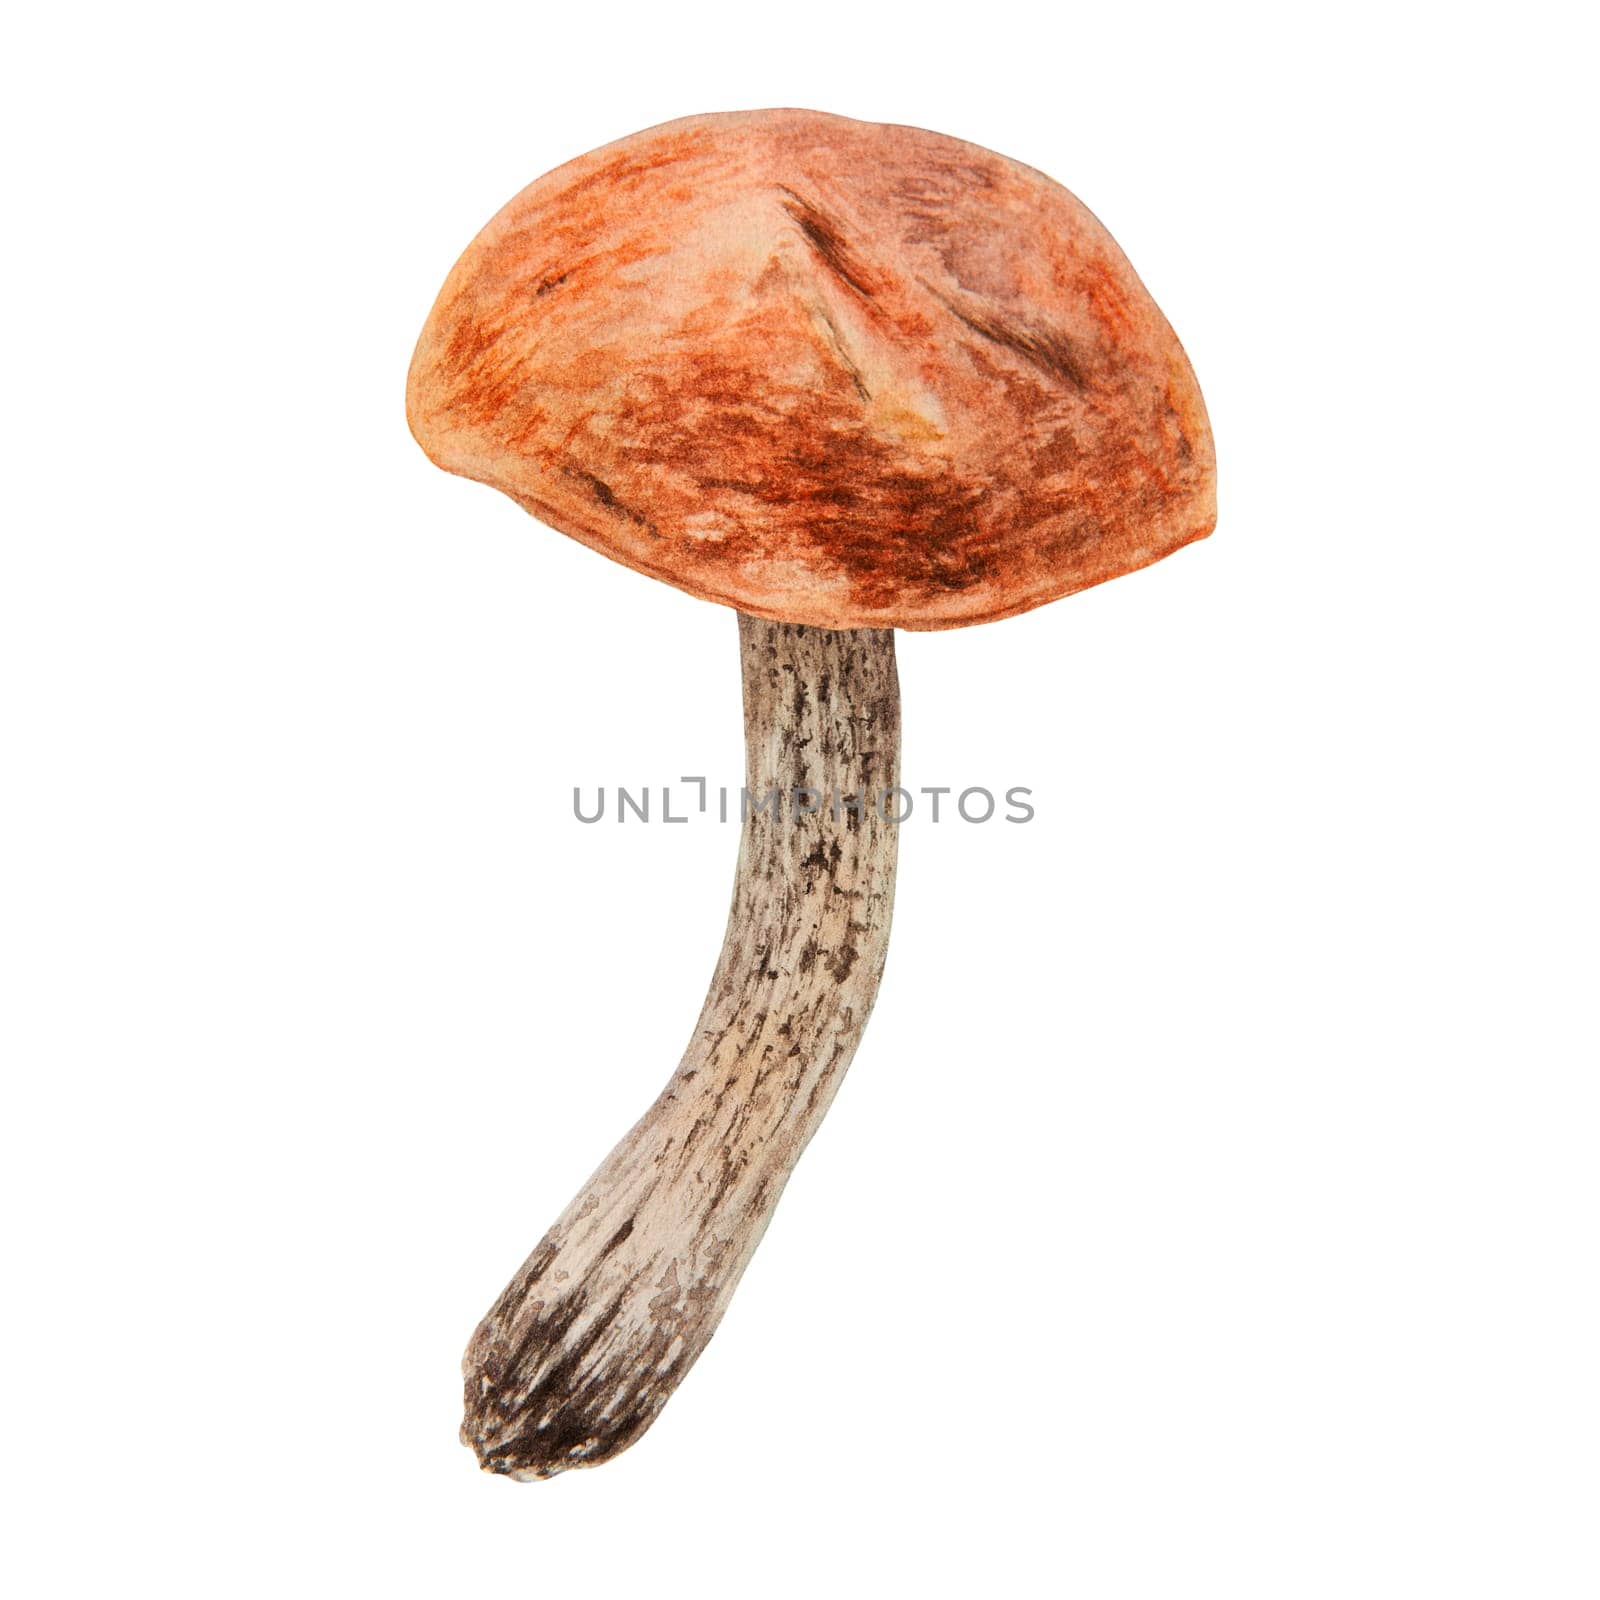 Wild edible mushroom with red cap. Watercolor hand drawn botanical realistic illustration. Forest boletus clip art. Isolated painting for fabric, postcards, invitations, menus, prints, packing paper by florainlove_art